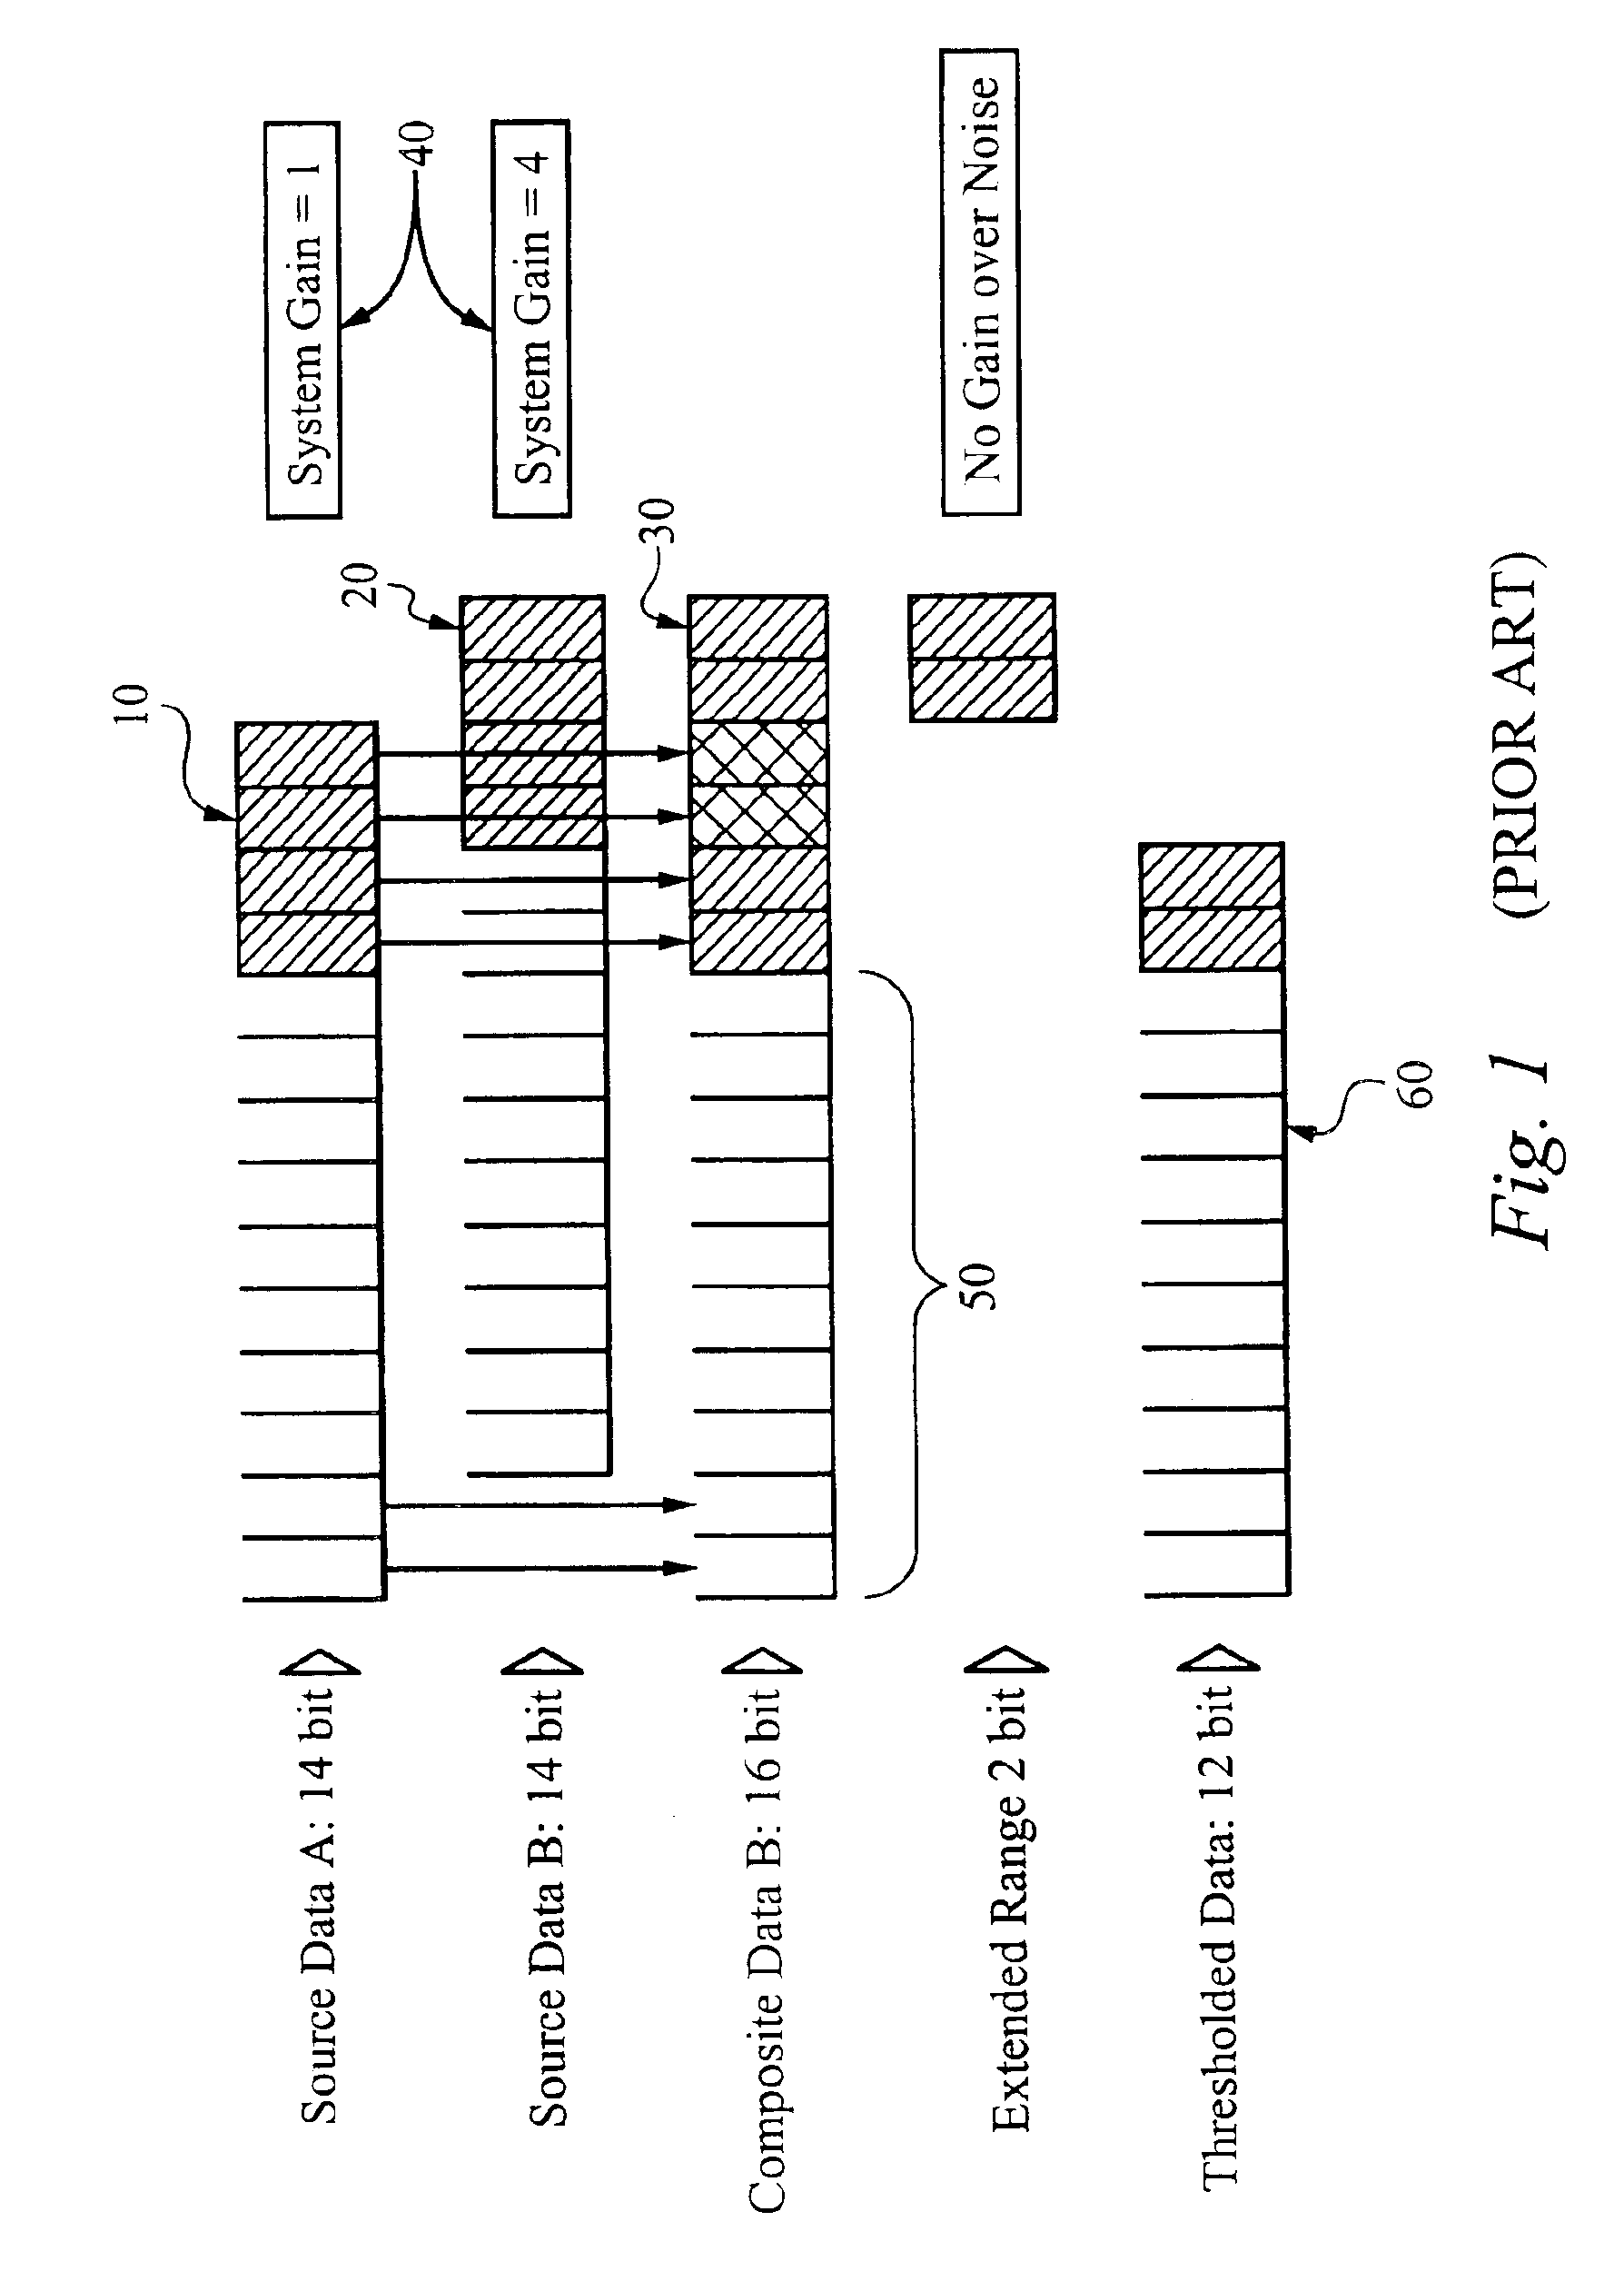 Method of and apparatus for extending signal ranges of digital images